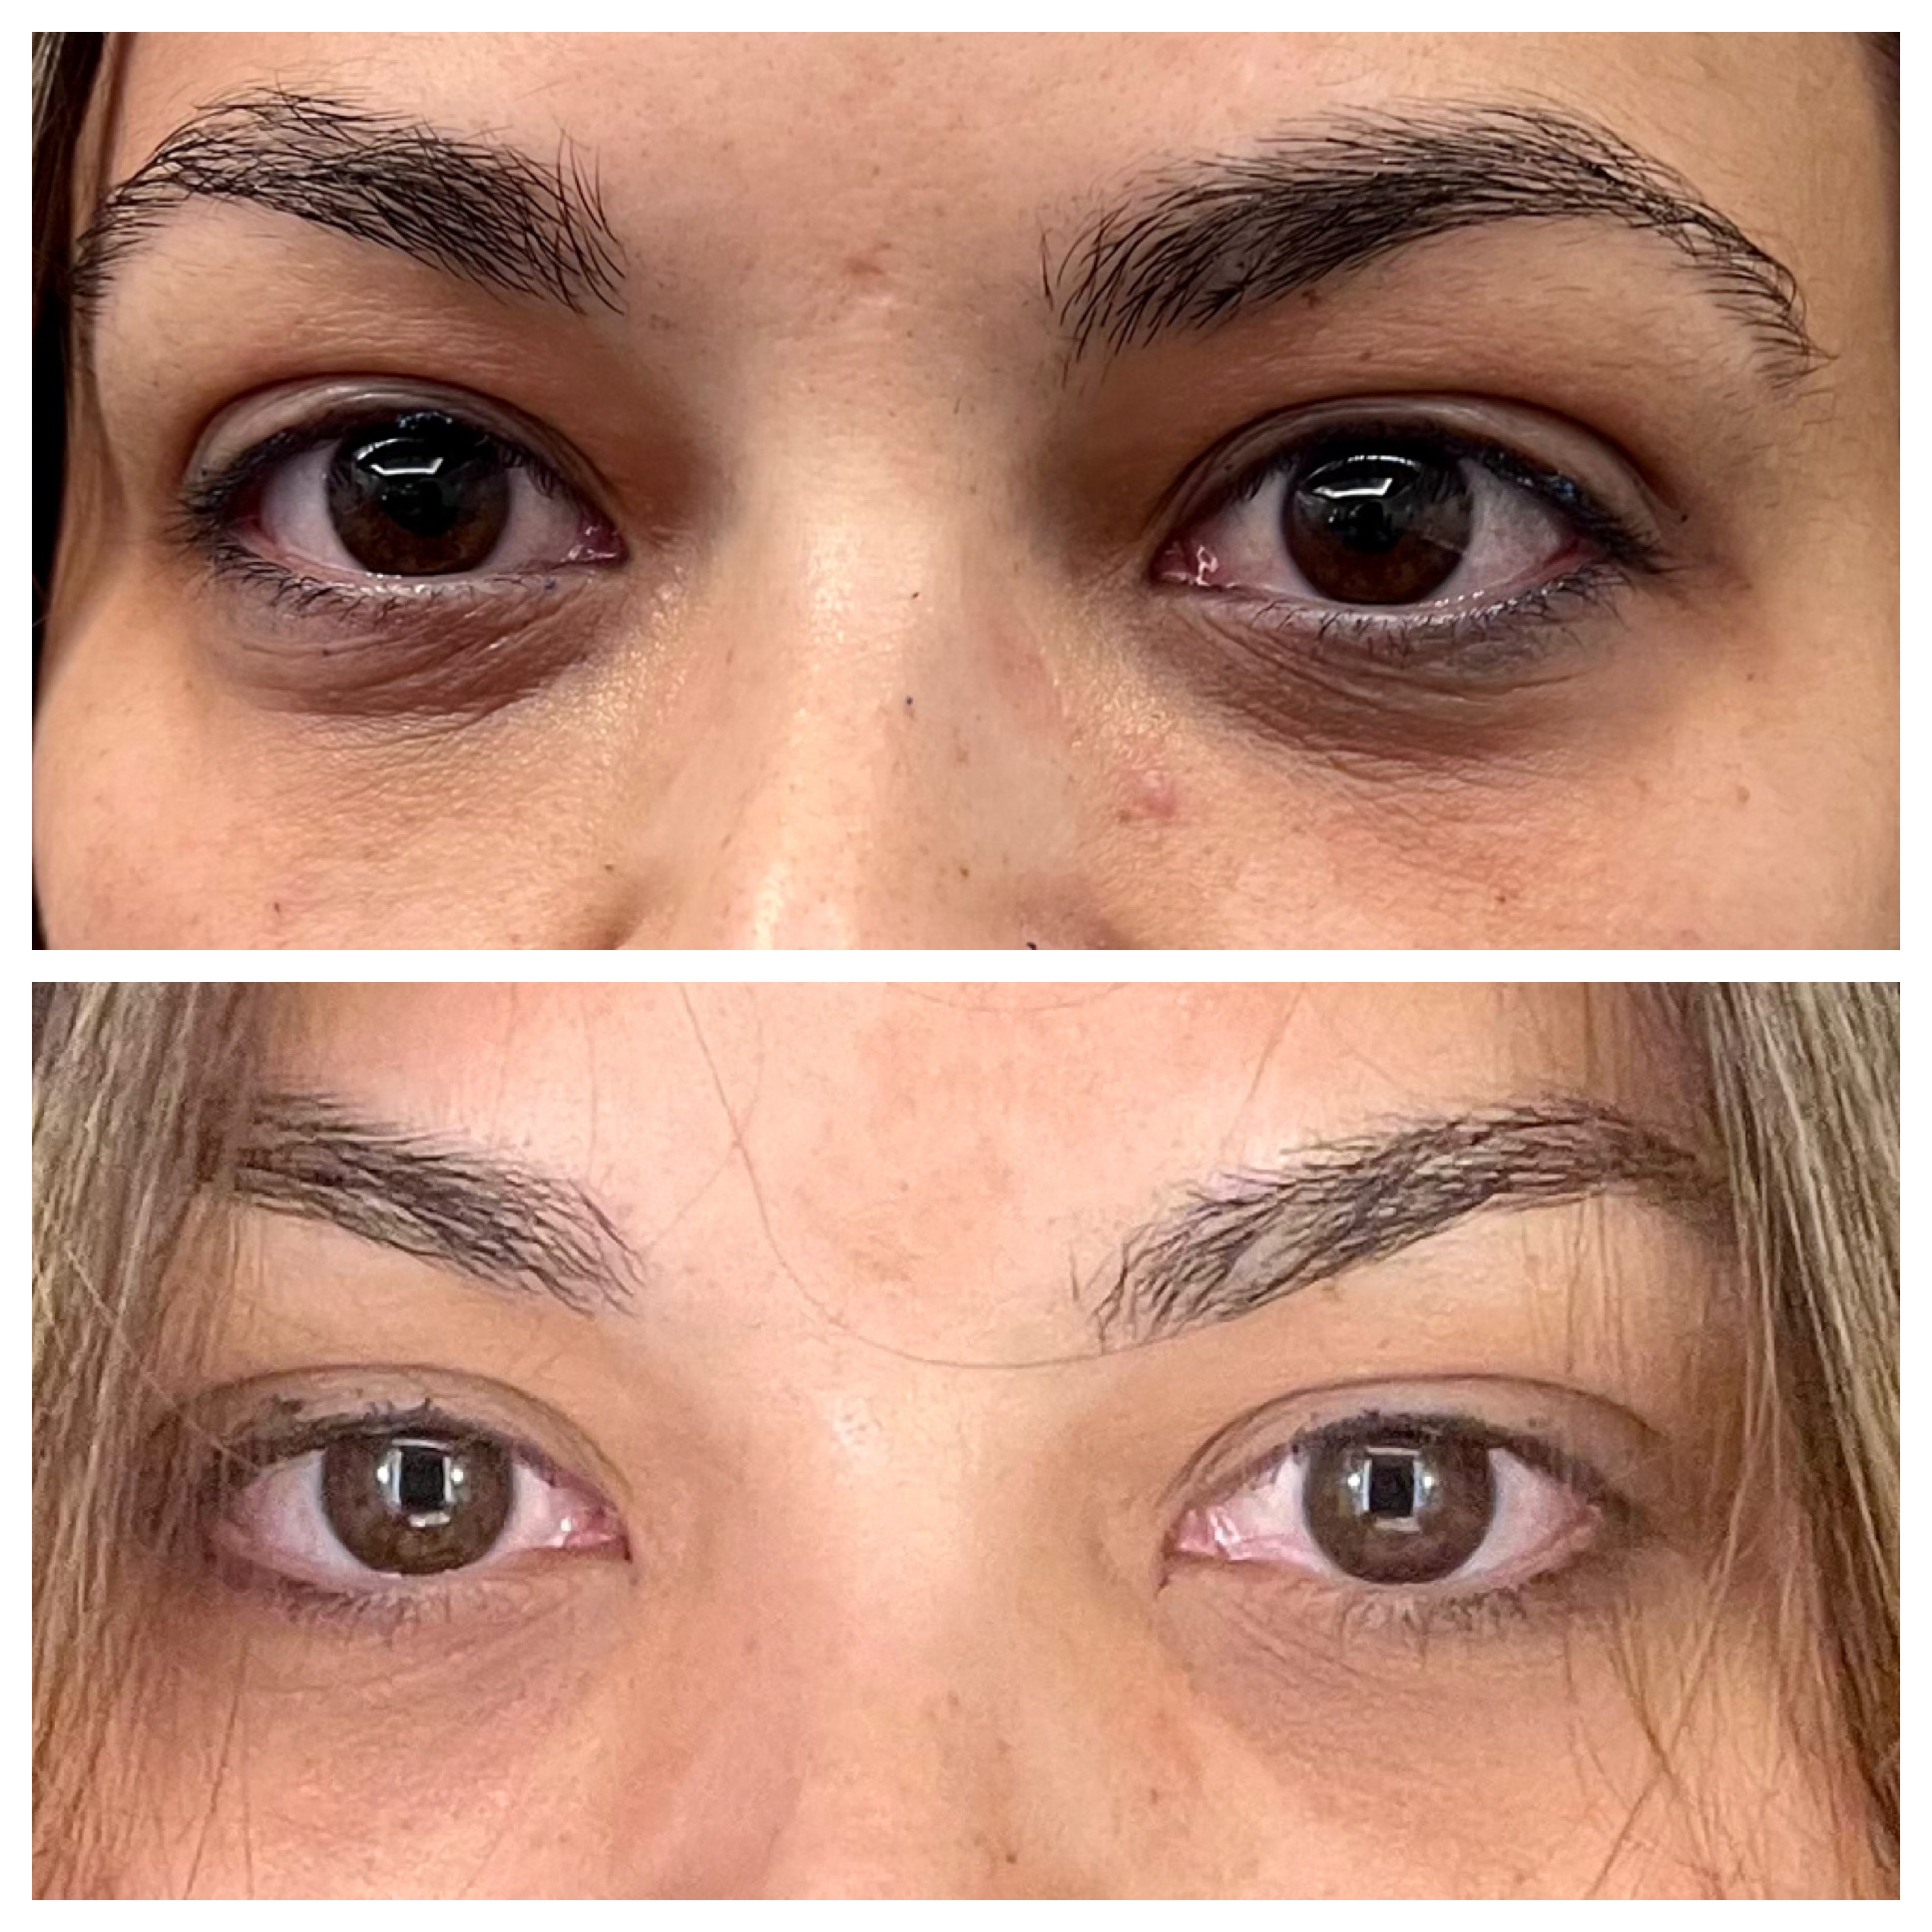 NeoGen Plasma- Eye Treatment before & after treatment photos in Leominster, MA | Opulent Aesthetics and Wellness